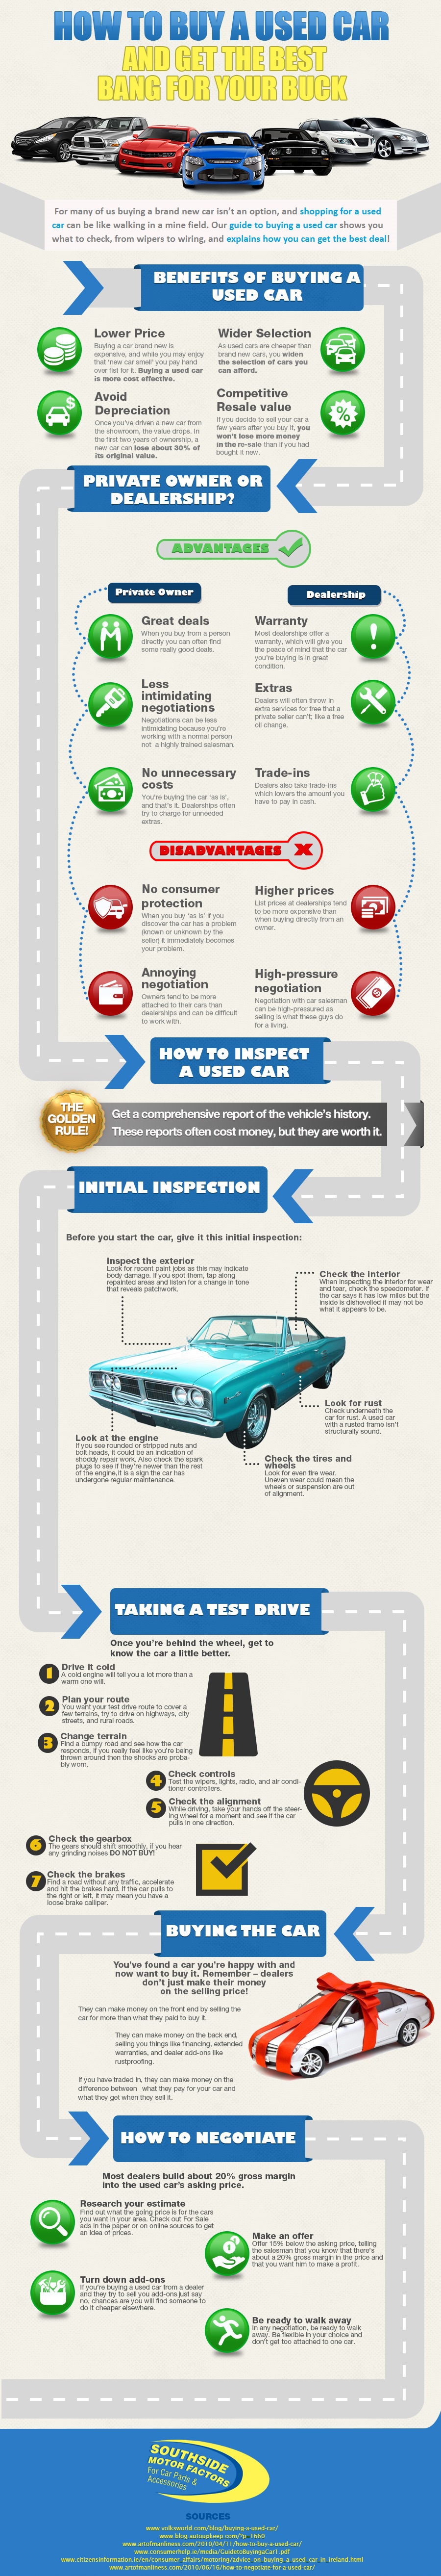 How To Buy a Used Car & Get the Best Bang For Your Buck